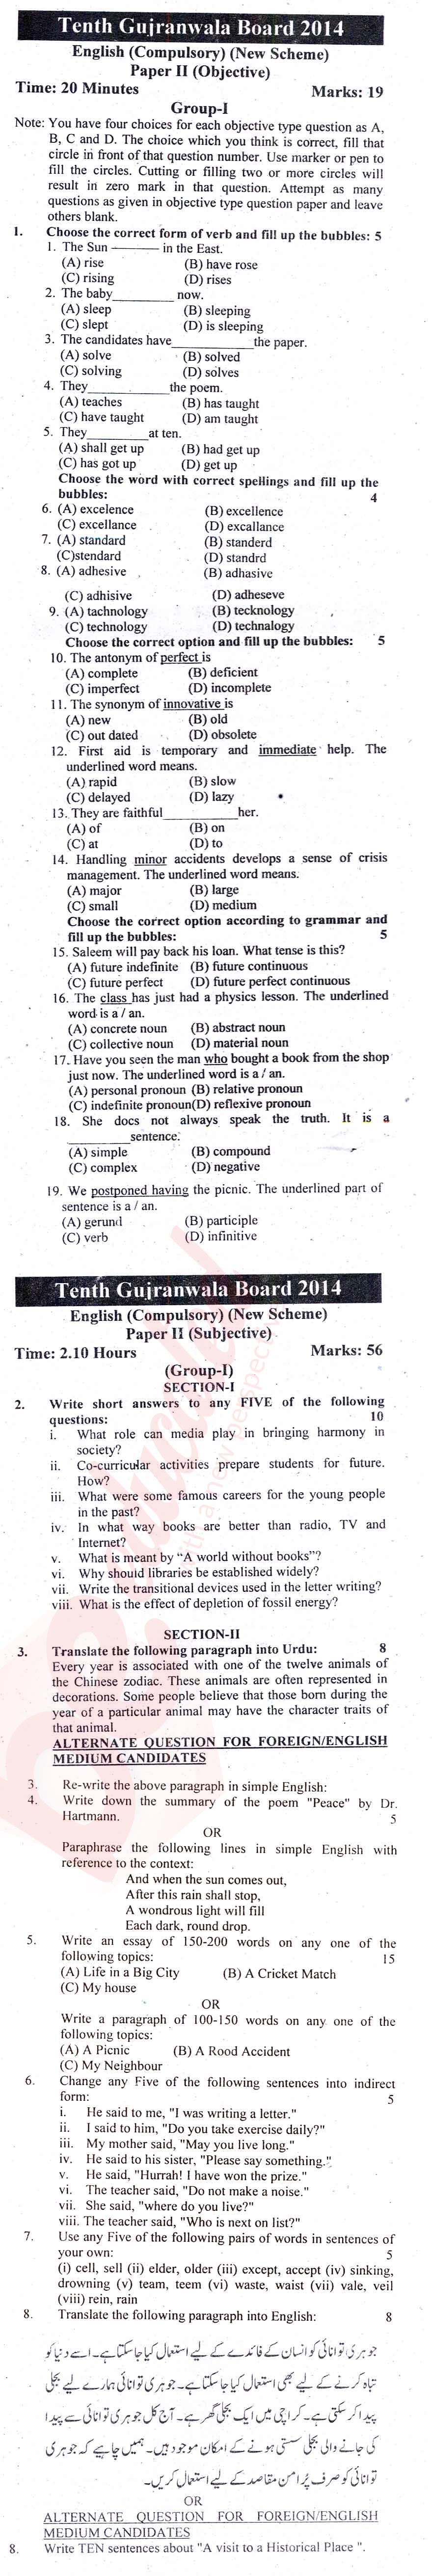 English 10th class Past Paper Group 1 BISE Gujranwala 2014